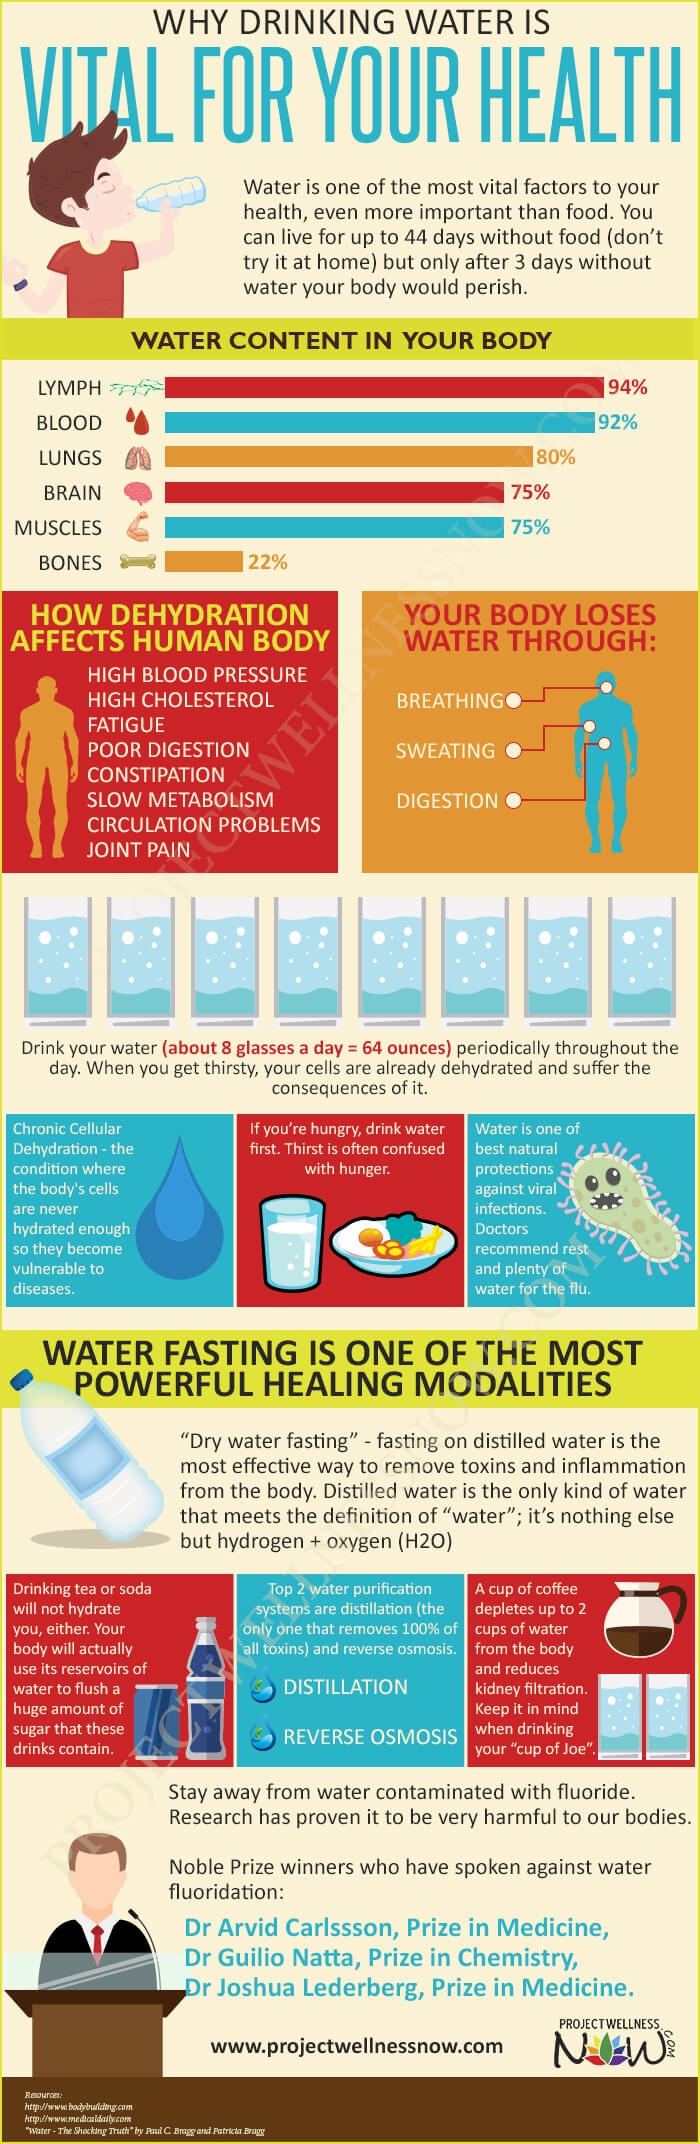 why drinking water is vital for your health